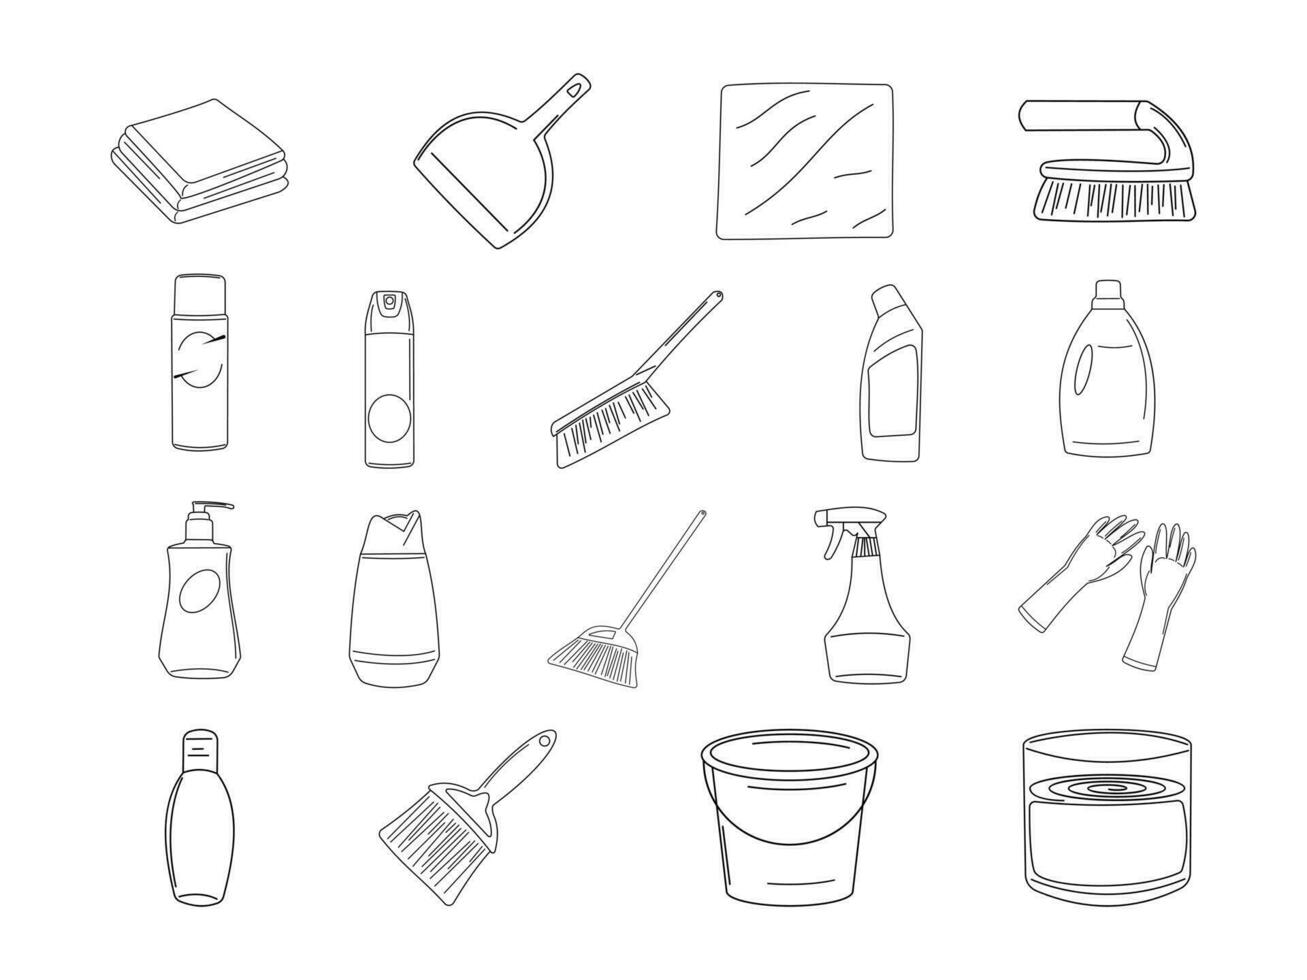 Home Cleaning Supplies Line Art Illustration. Cleaning Tools Vector Illustration on White Background.